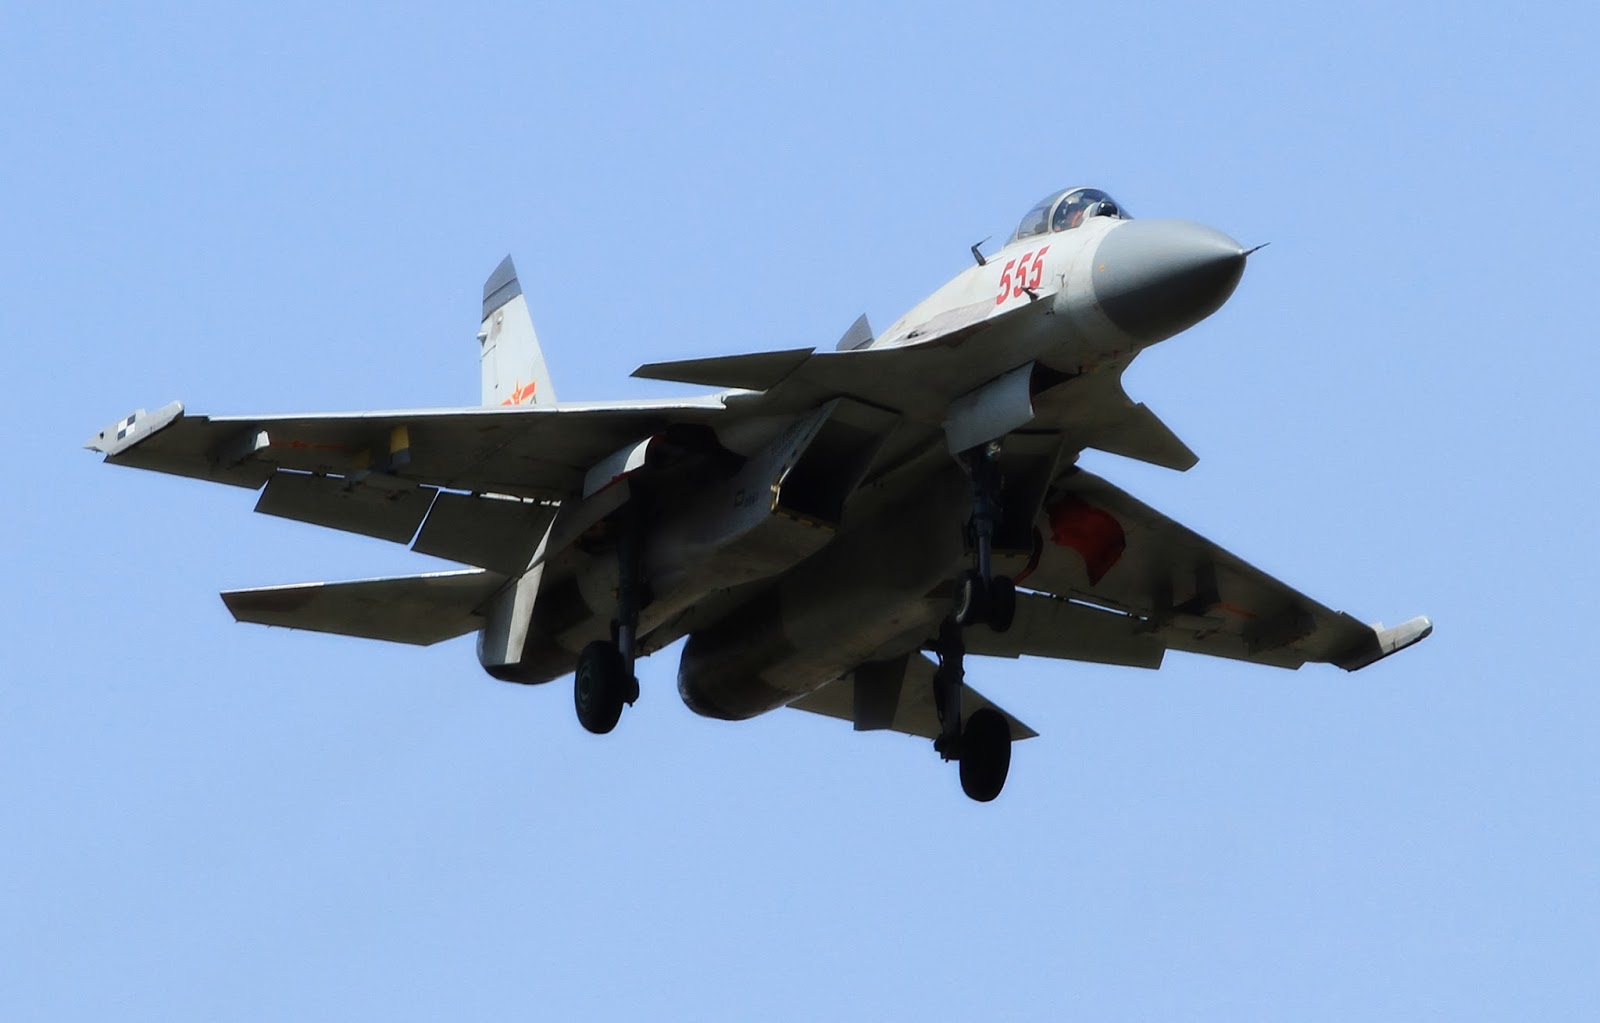 Shenyang J-15 - Página 2 China%E2%80%99s+first+carrier-borne+J15+fighter+jets+were+displayed+for+public+to+see+Wednesday+in+Xi%E2%80%99an+of+northwest+China%E2%80%99s+Shaanxi+Province+(3)